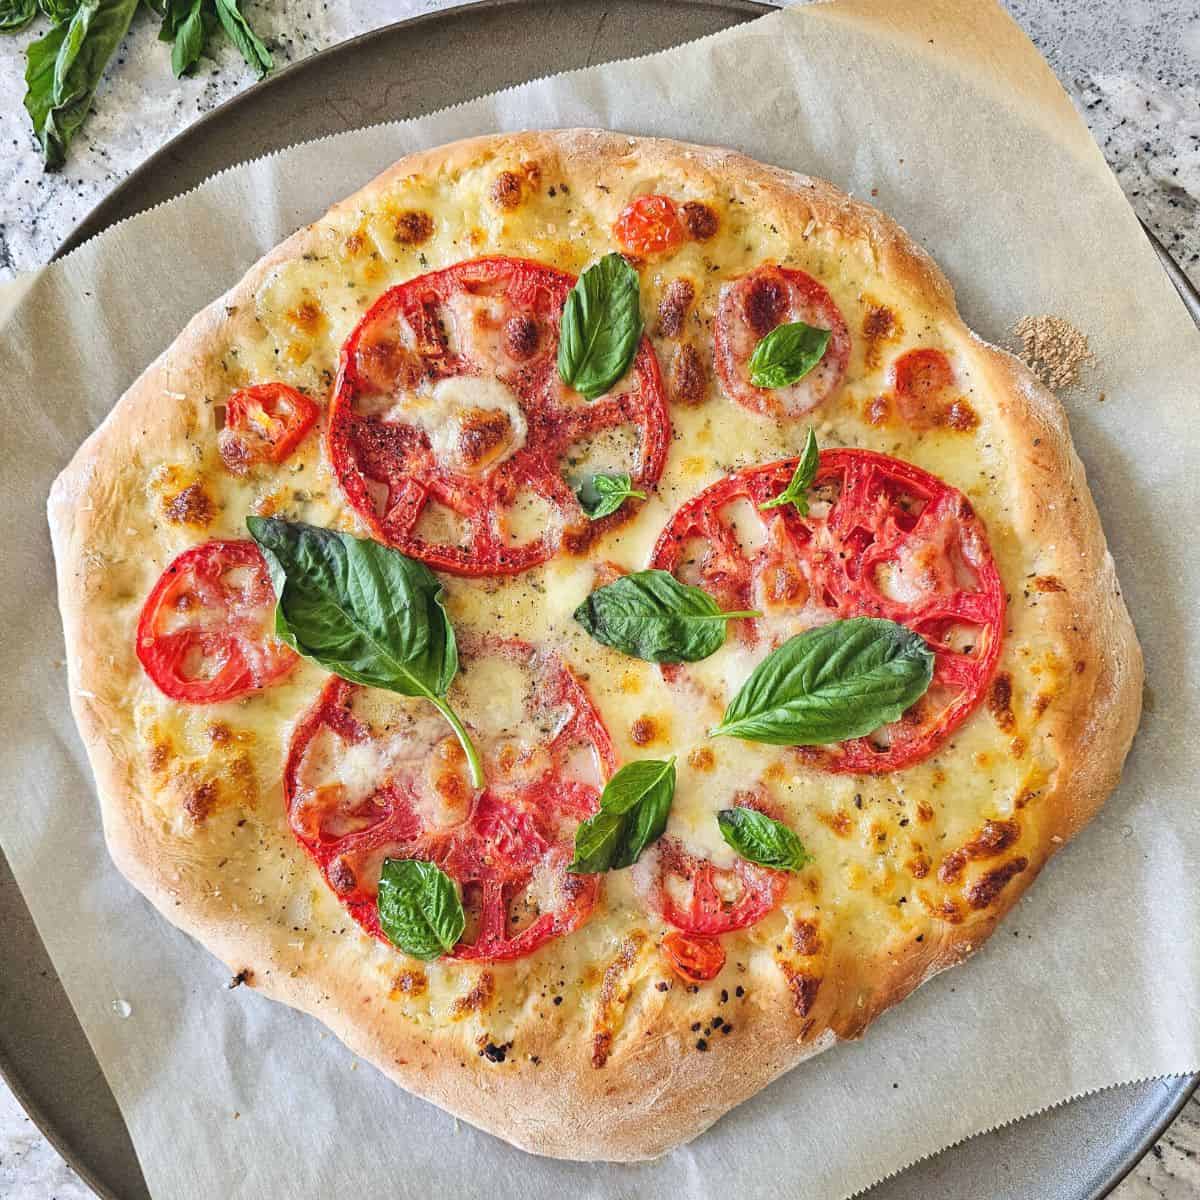 Best Pour-in-the-Pan Pizza with Tomatoes and Mozzarella Recipe - How to  Make Pour-in-the-Pan Pizza with Tomatoes and Mozzarella